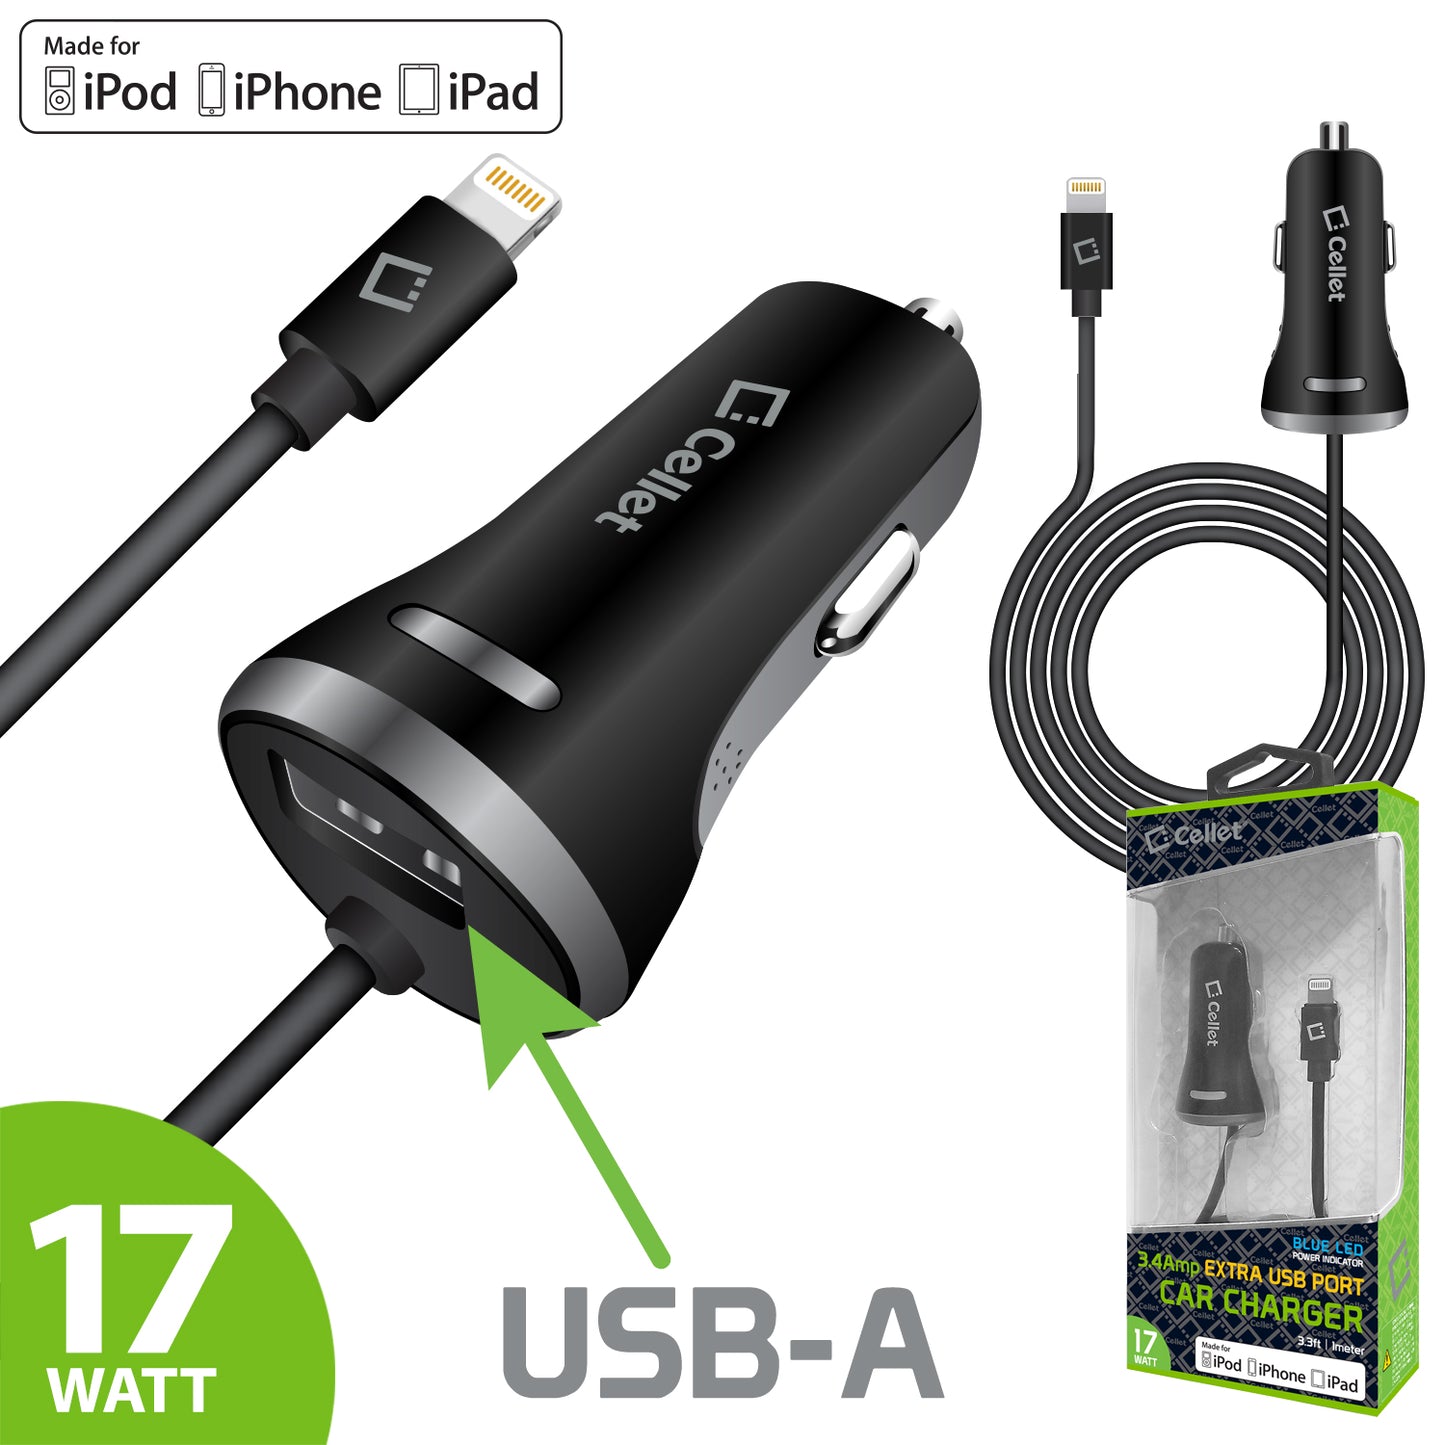 PAPP8H34BK - MFI Certified Lightning Car Charger 3.4 Amp with USB Port